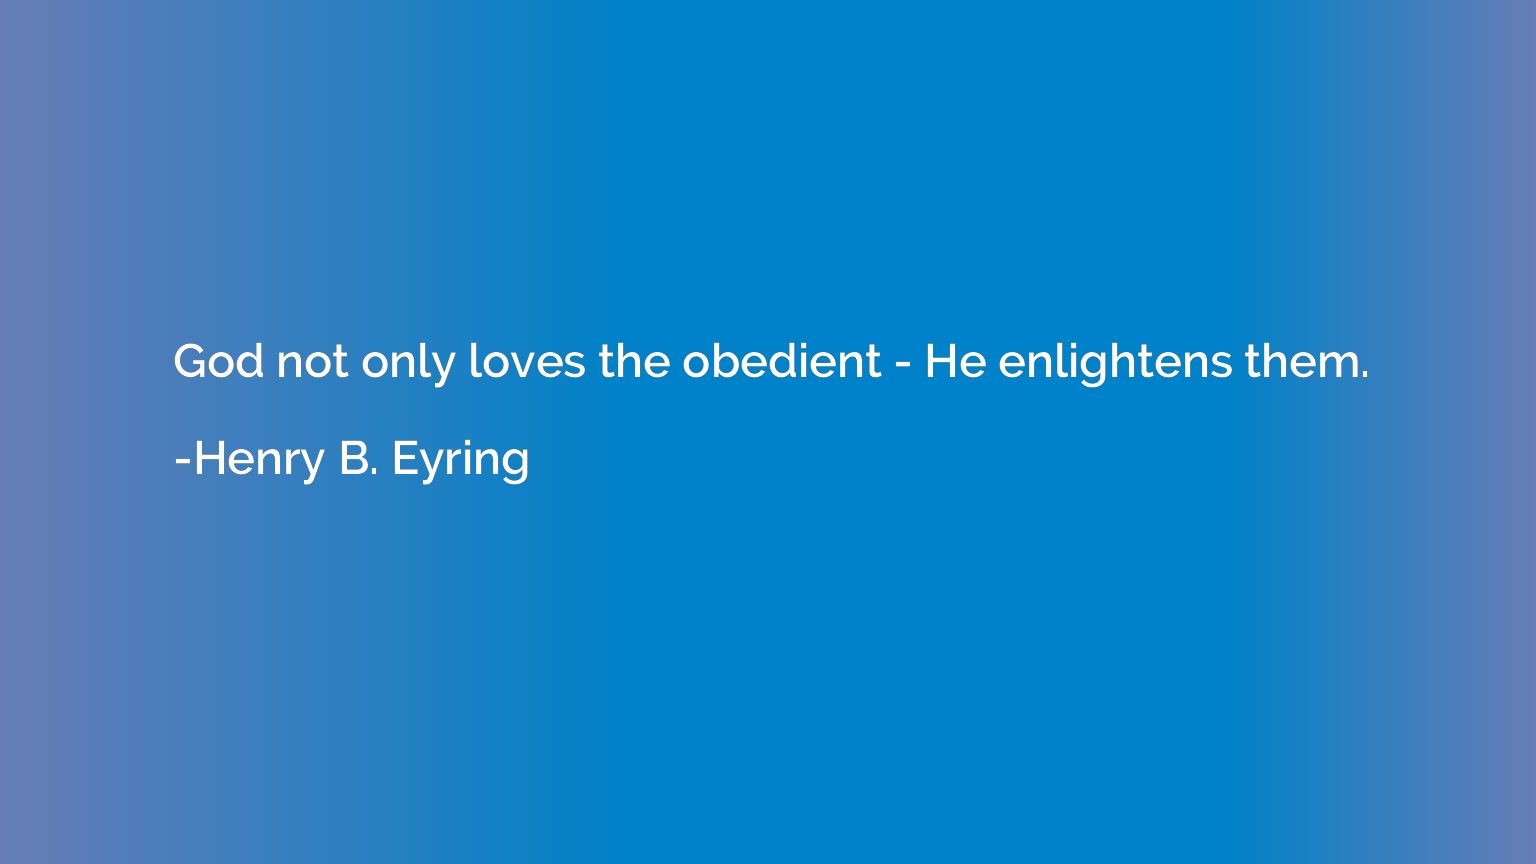 God not only loves the obedient - He enlightens them.